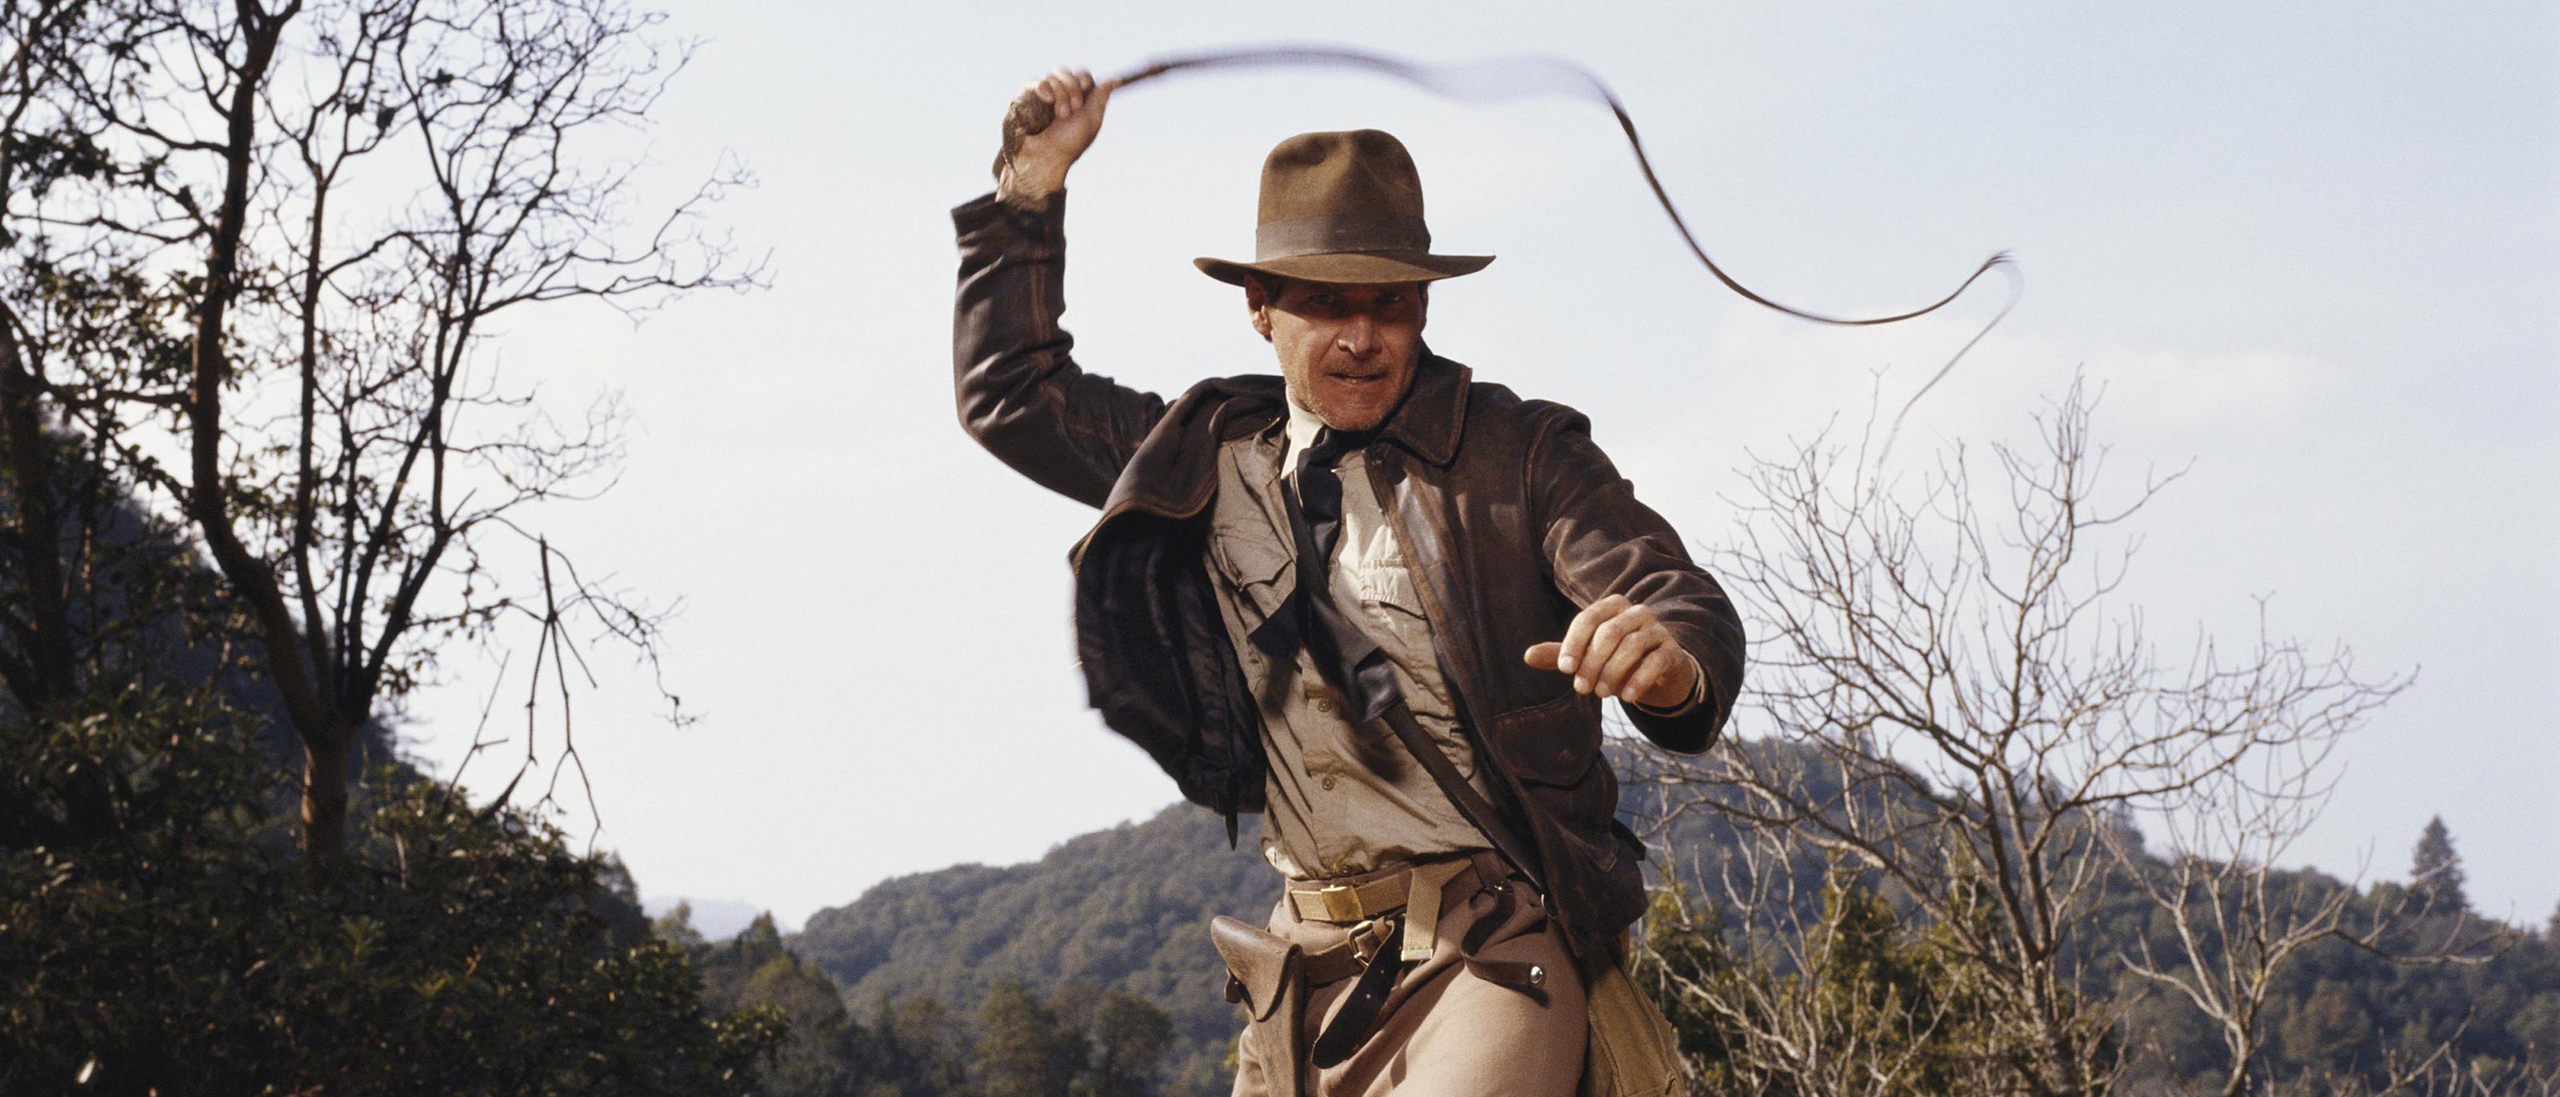 There is Only ONE Indiana Jones. Producer Says No Plan to Recast Indy for 5th Movie